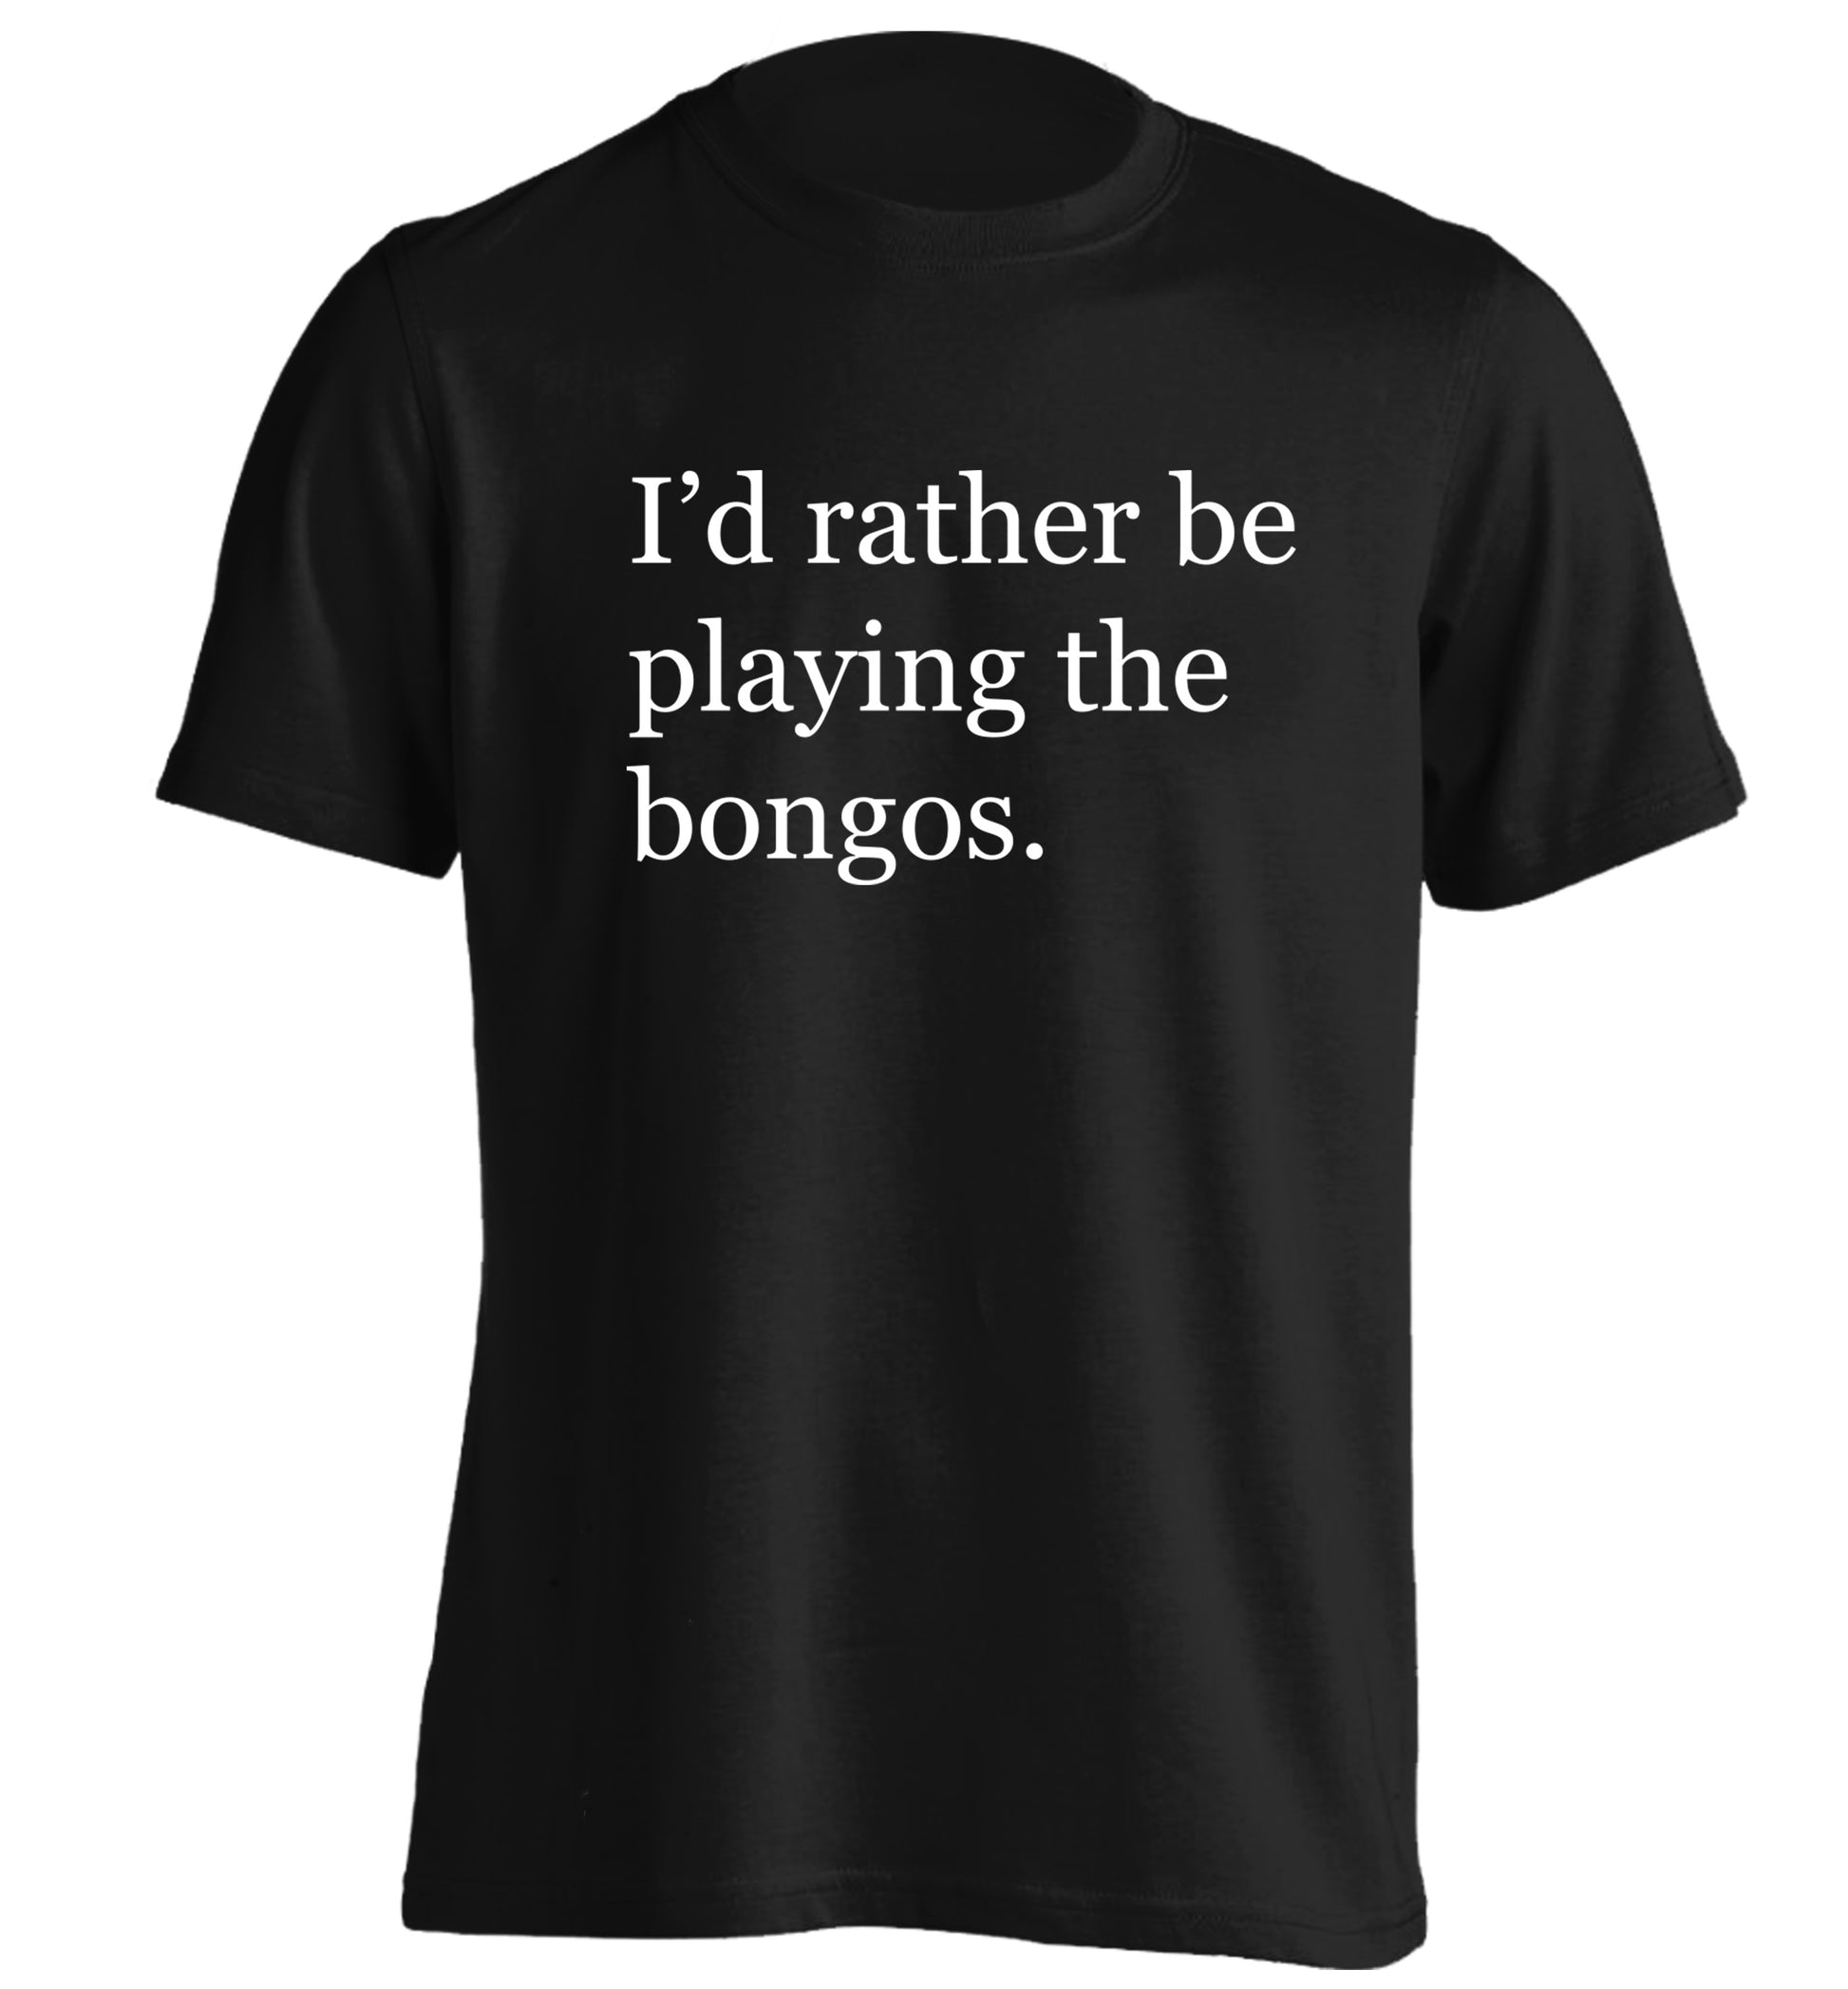 I'd rather be playing the bongos adults unisexblack Tshirt 2XL